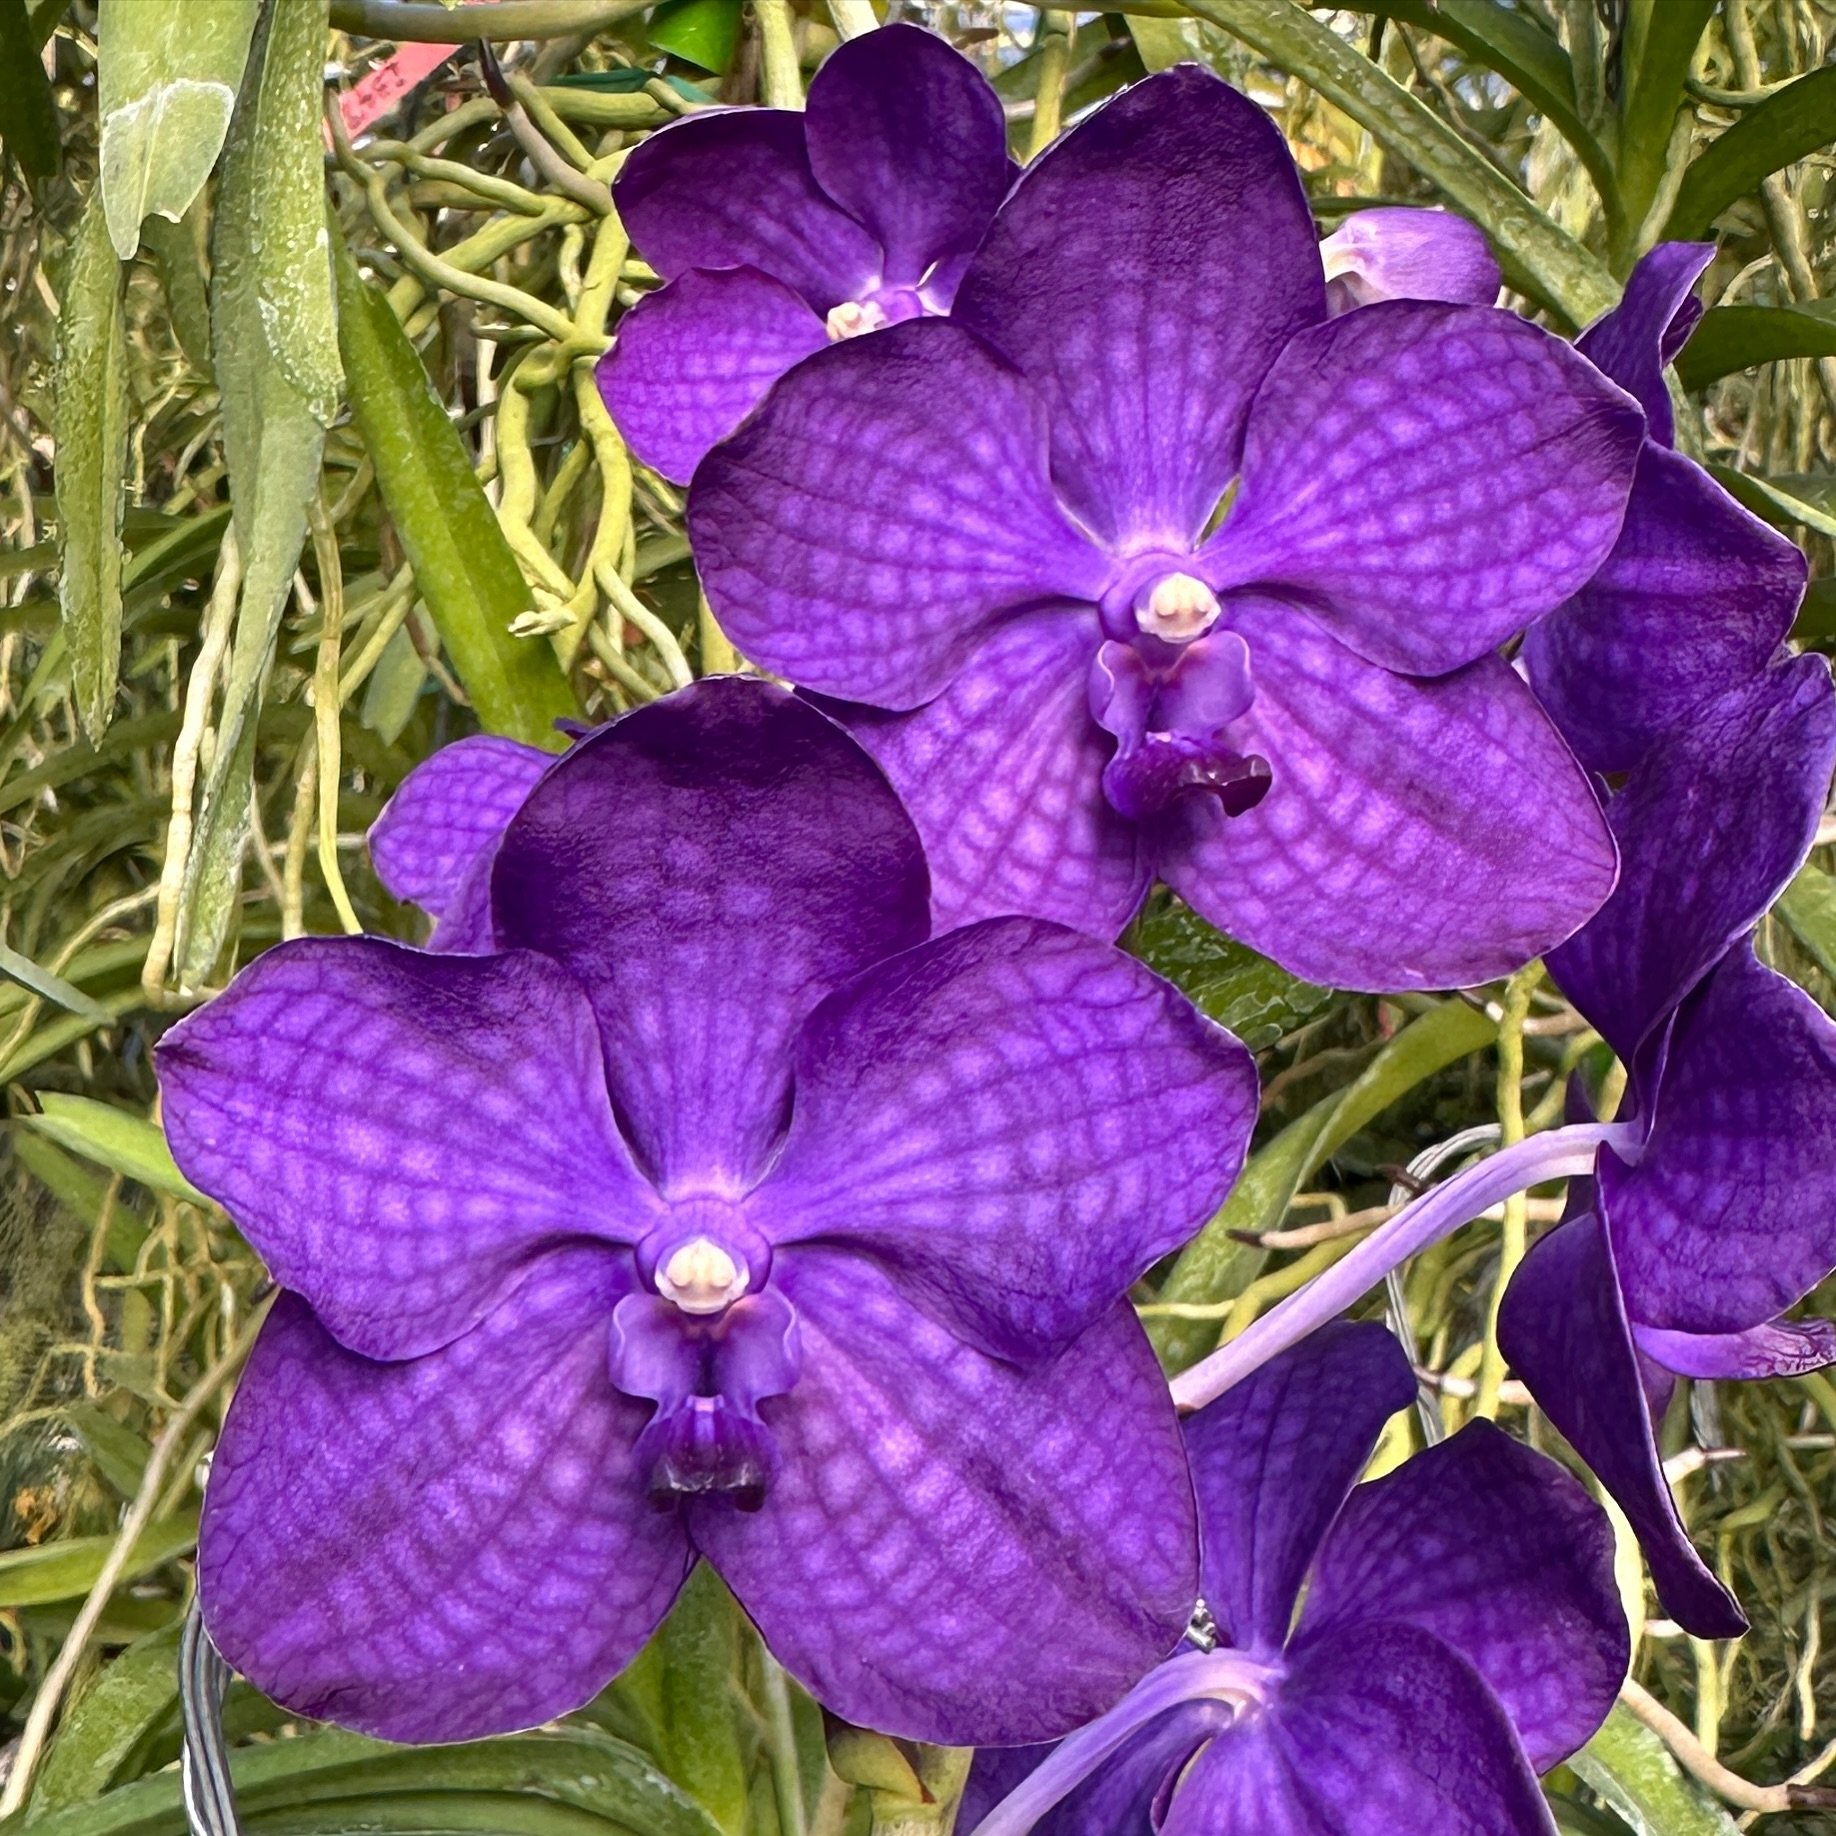 Vanda Violeta x Vanda Elizabeth Taylor (2887), gorgeous purple. How did Vanda Elizabeth Taylor, one of the parents of this beauty get its name? We got a request for a gift for her. We picked a really spectacular plant. This was about thirty years ago